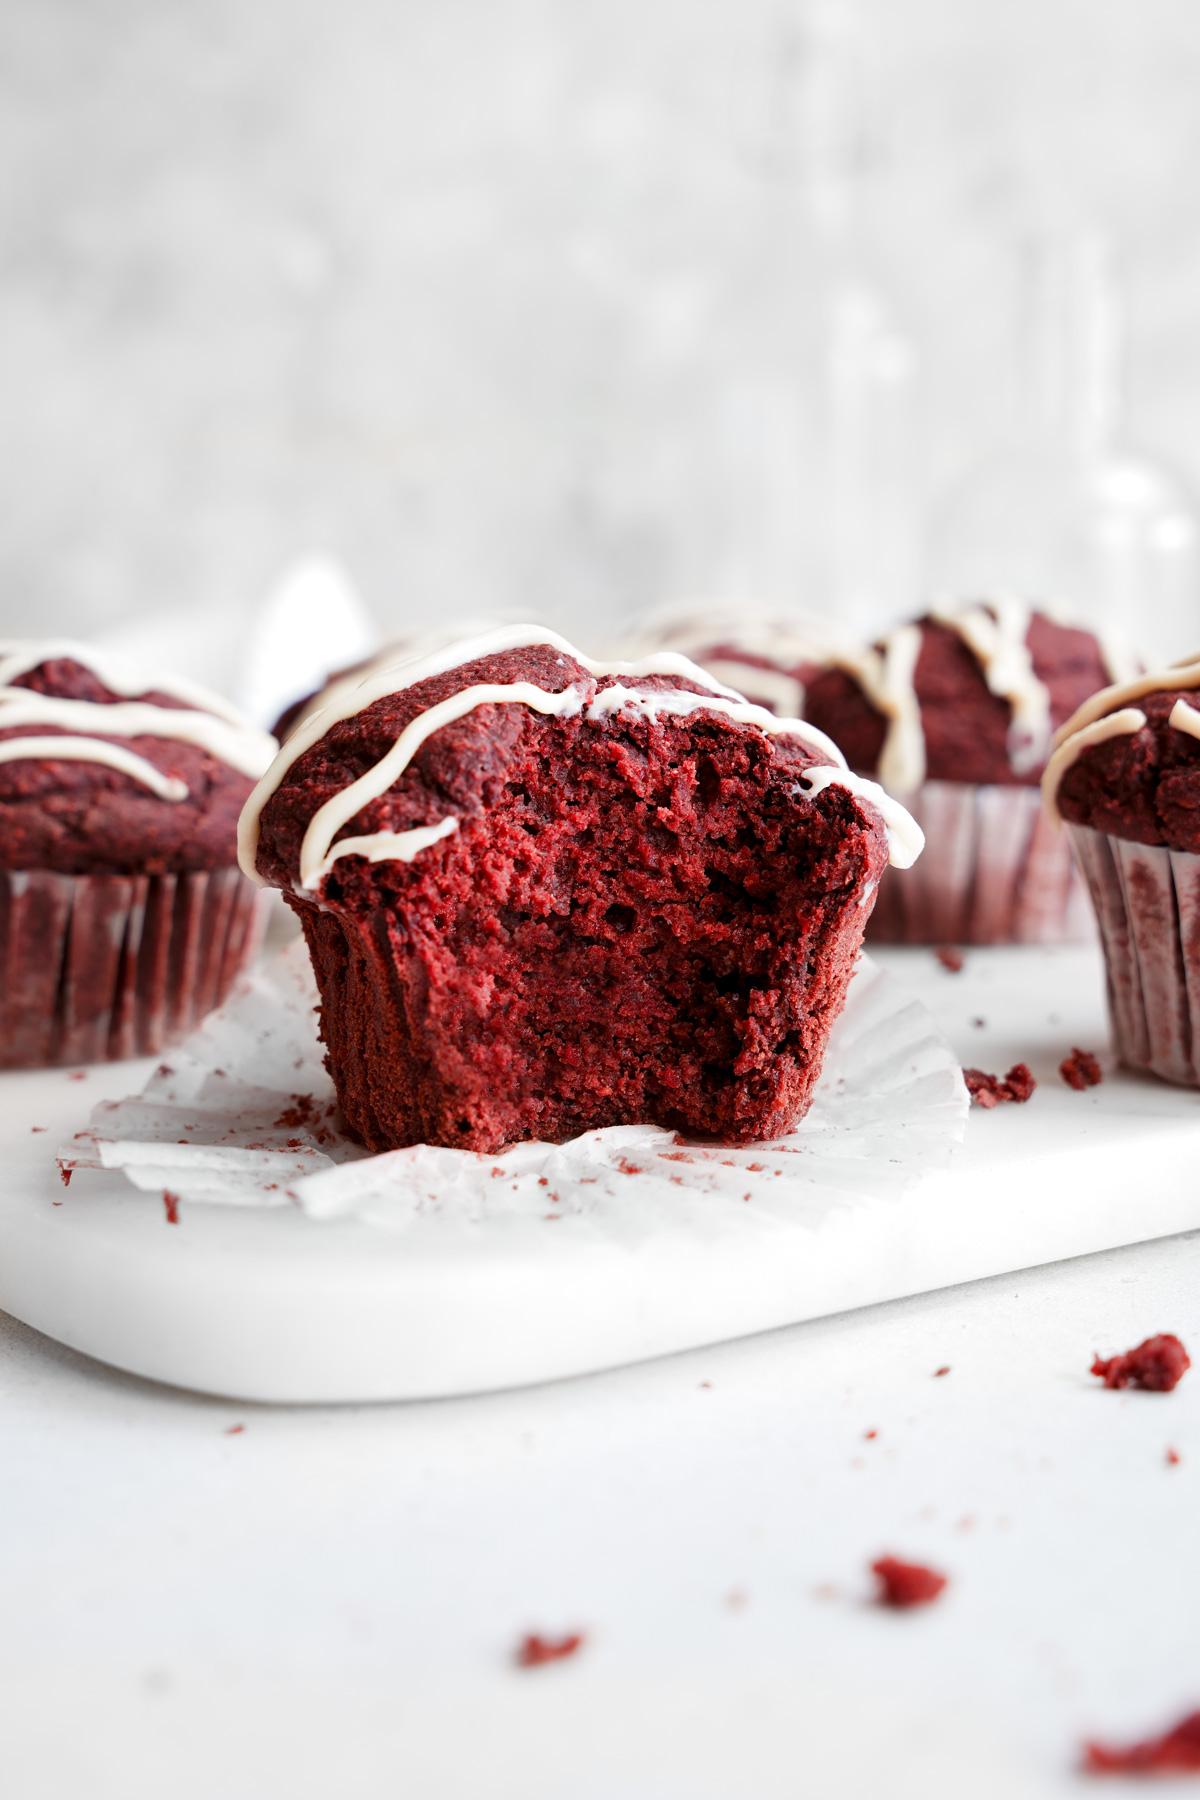 the red velvet muffins with a bite taken out of one standing up